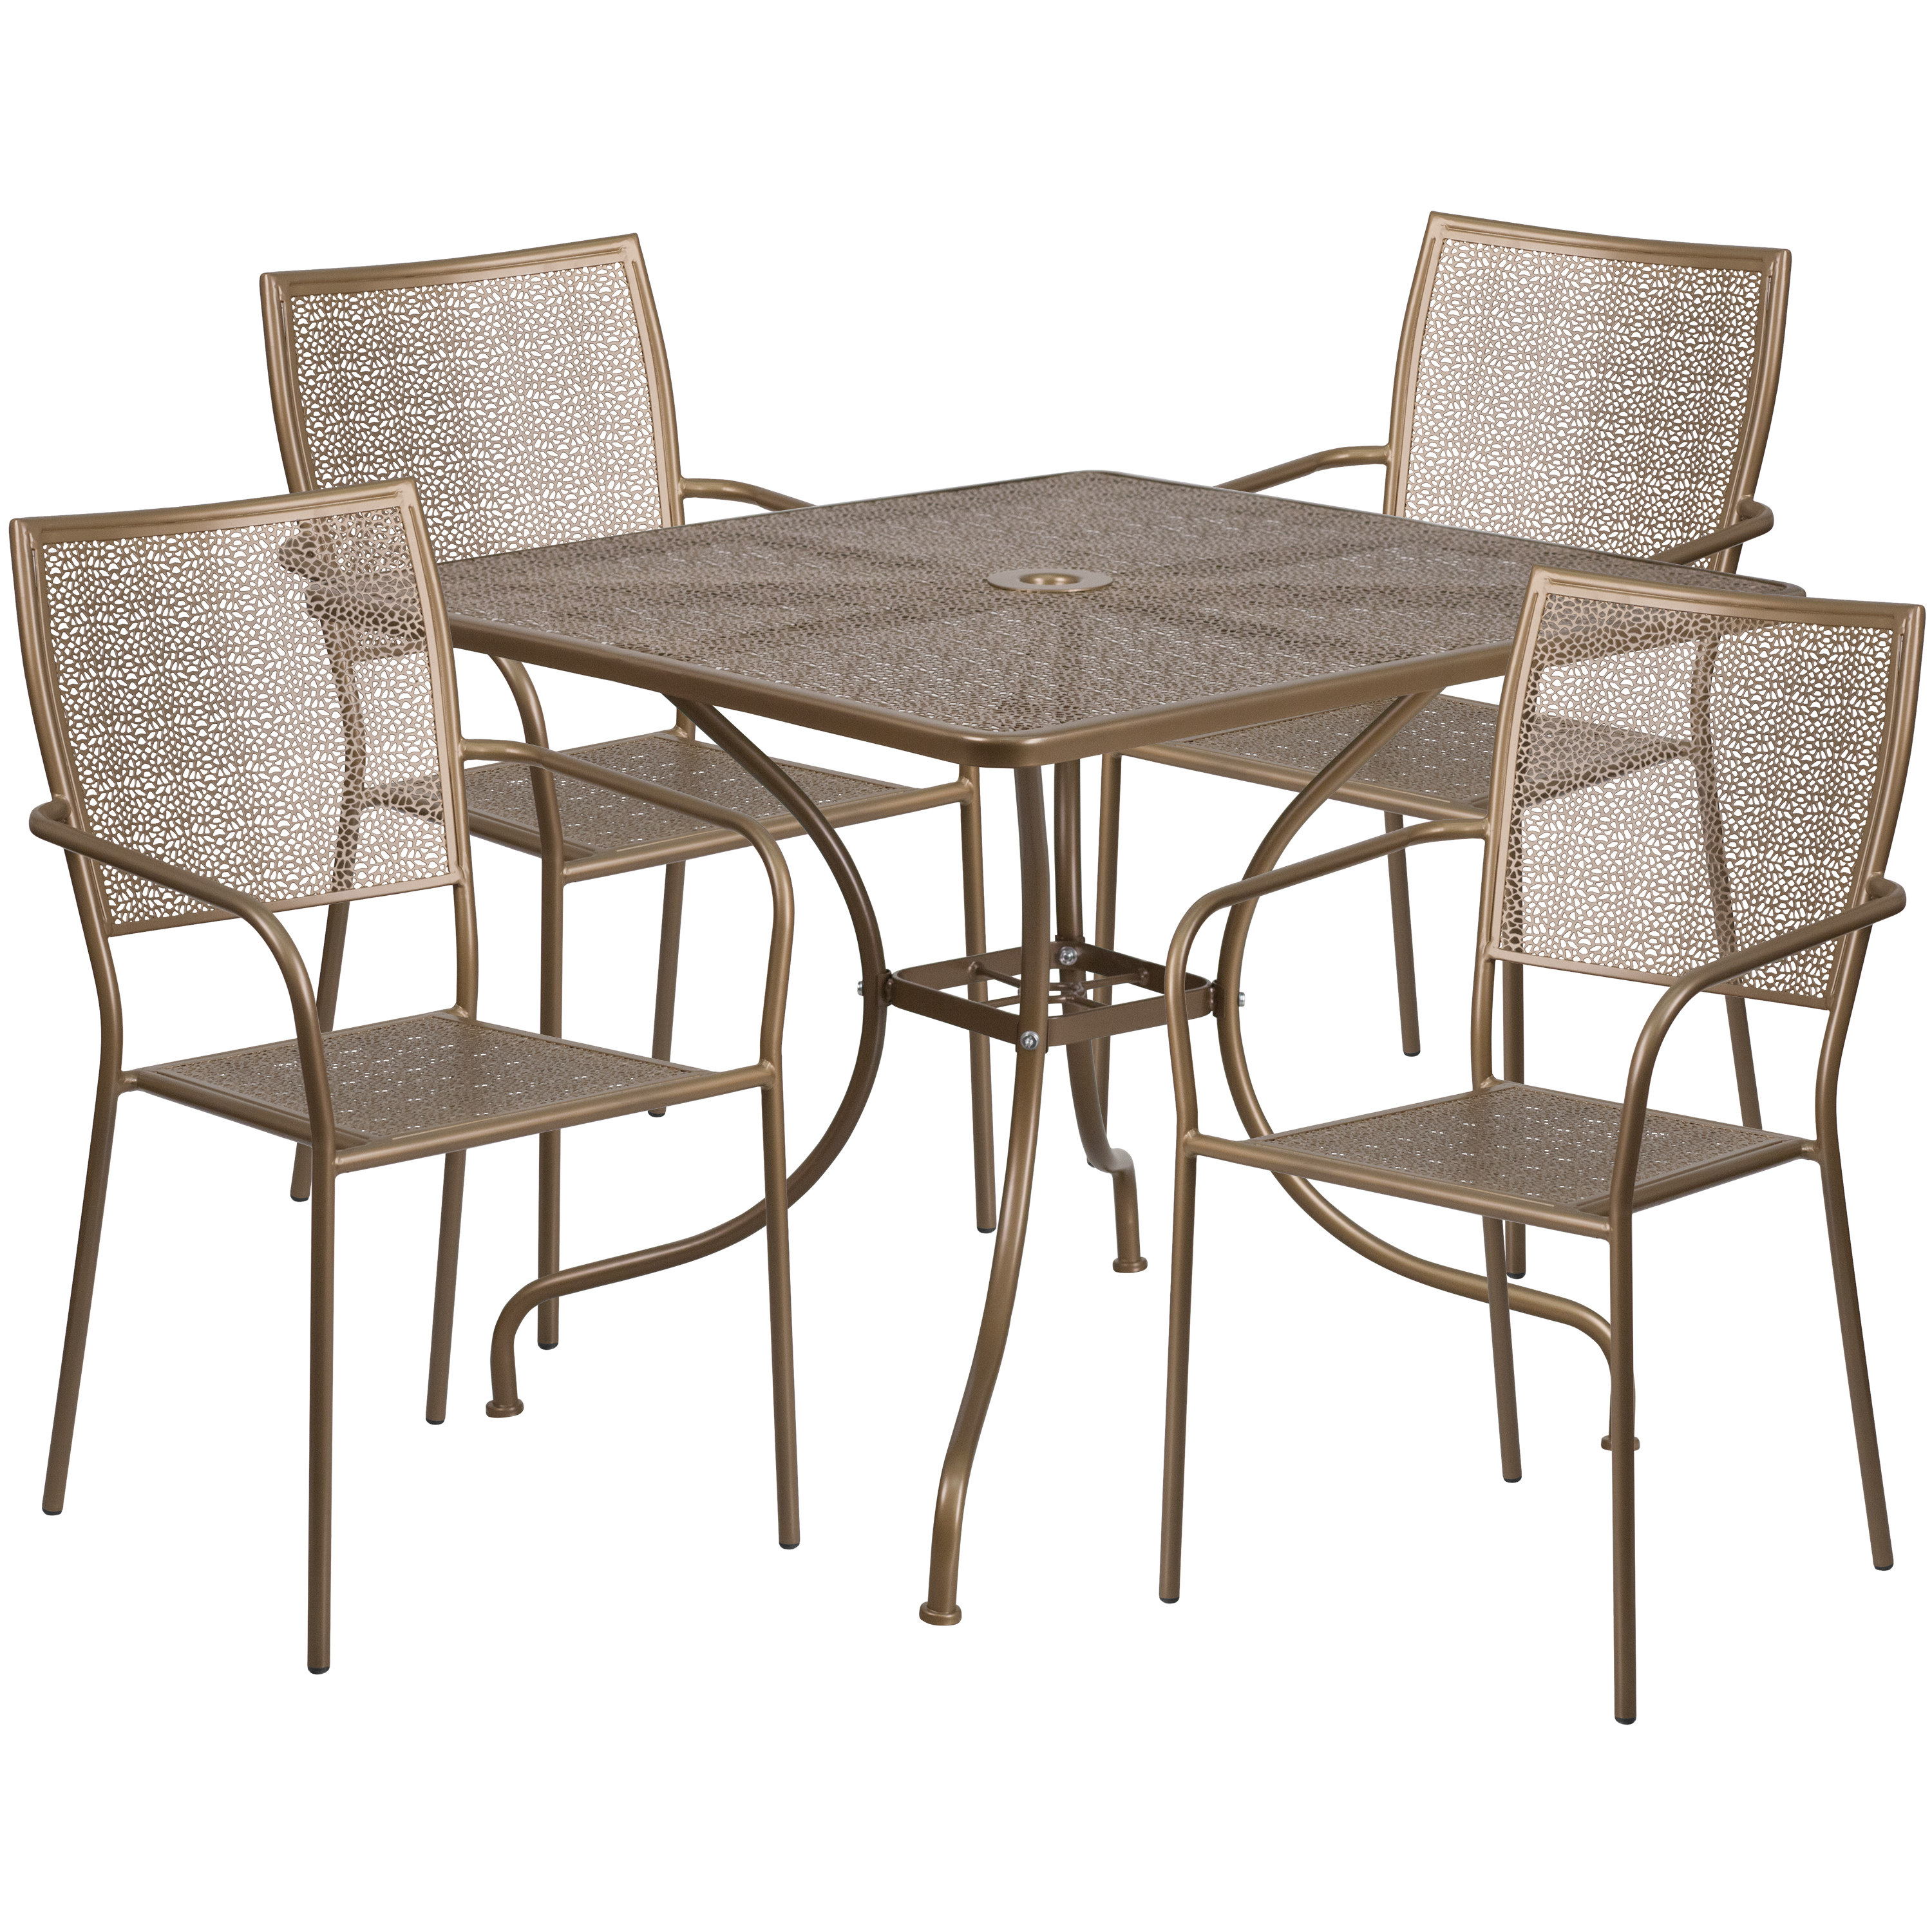 Flash Furniture CO-35SQ-02CHR4-GD-GG 35.5" Square Gold Indoor/Outdoor Steel Patio Table Set with 4 Square Back Chairs